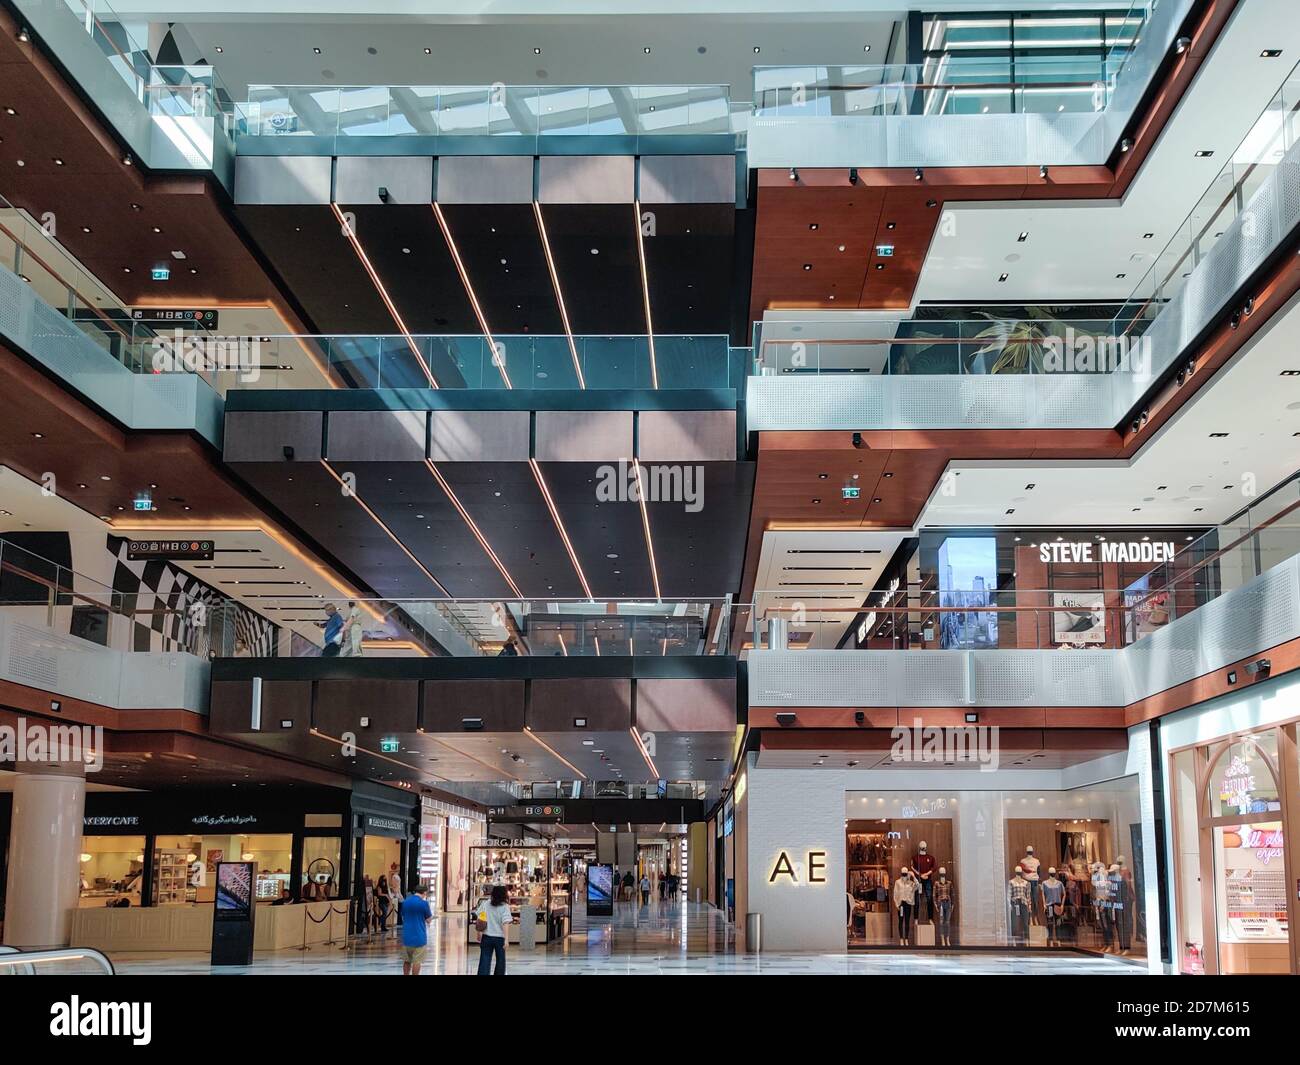 The exterior of The Galleria shopping mall in Abu Dhabi Stock Photo - Alamy